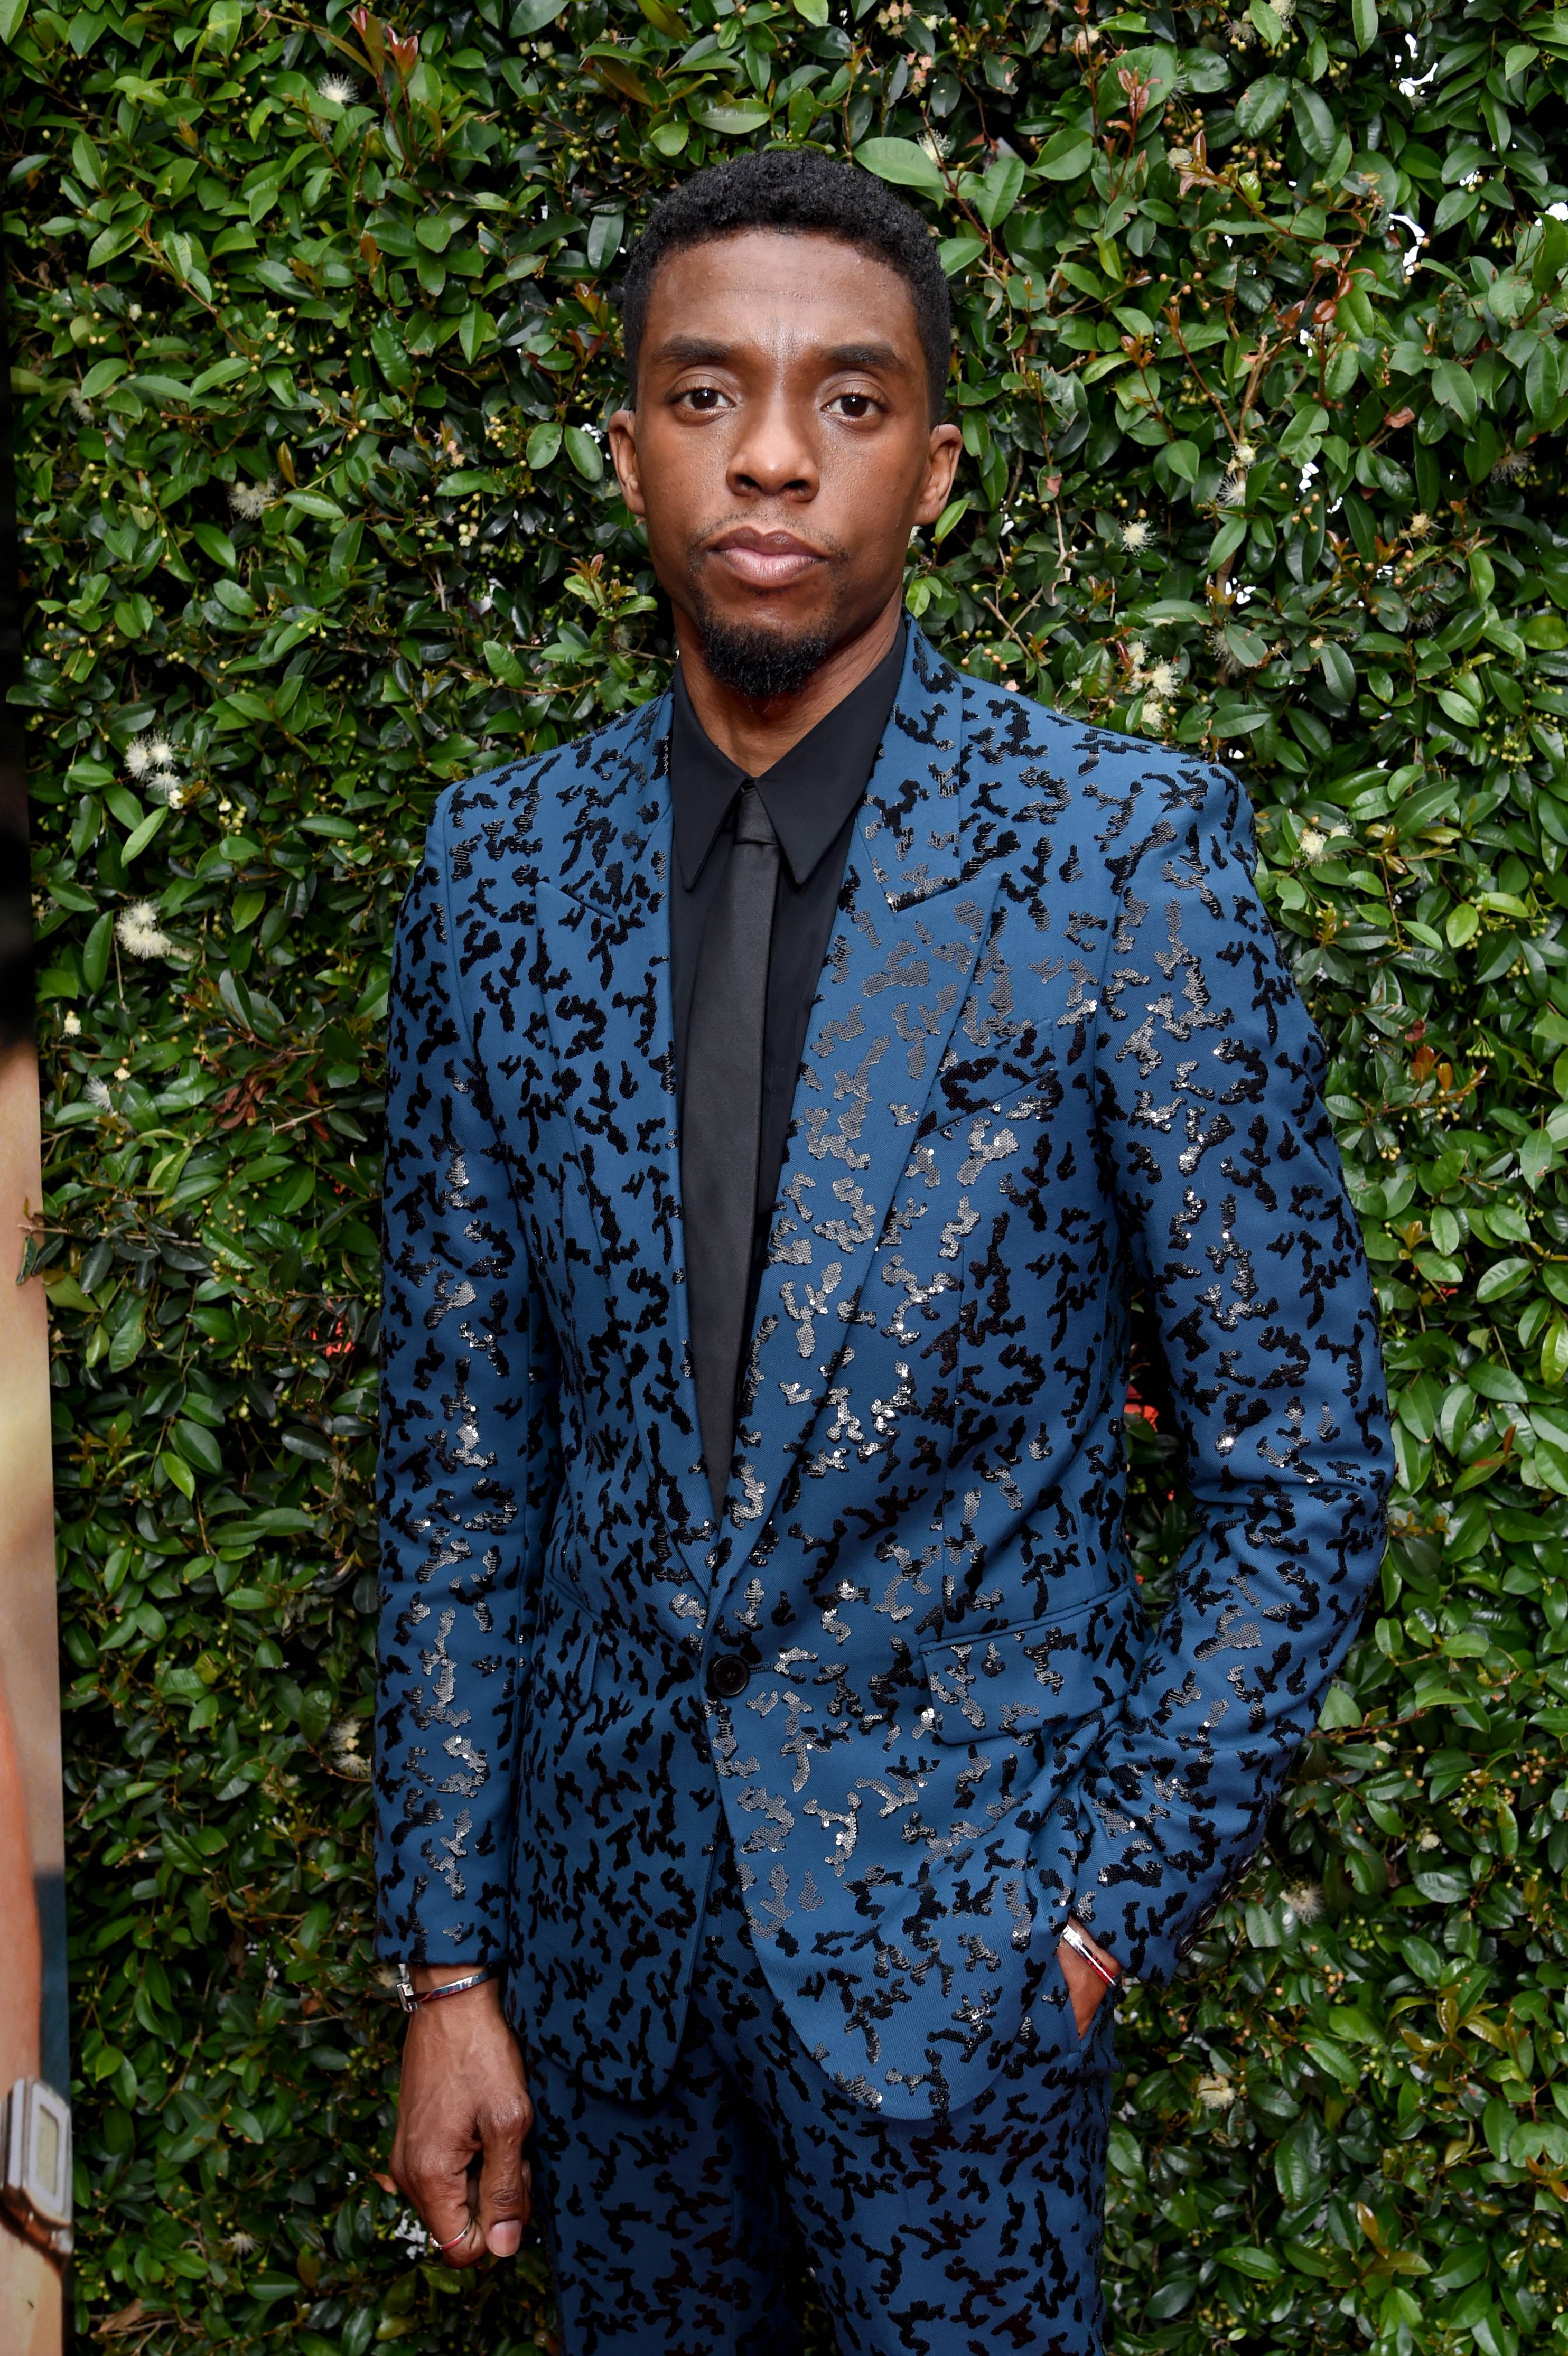 HOLLYWOOD, CALIFORNIA - JUNE 06: Chadwick Boseman attends the 47th AFI Life Achievement Award honoring Denzel Washington at Dolby Theatre on June 06, 2019 in Hollywood, California. (Photo by Michael Kovac/Getty Images for AFI)